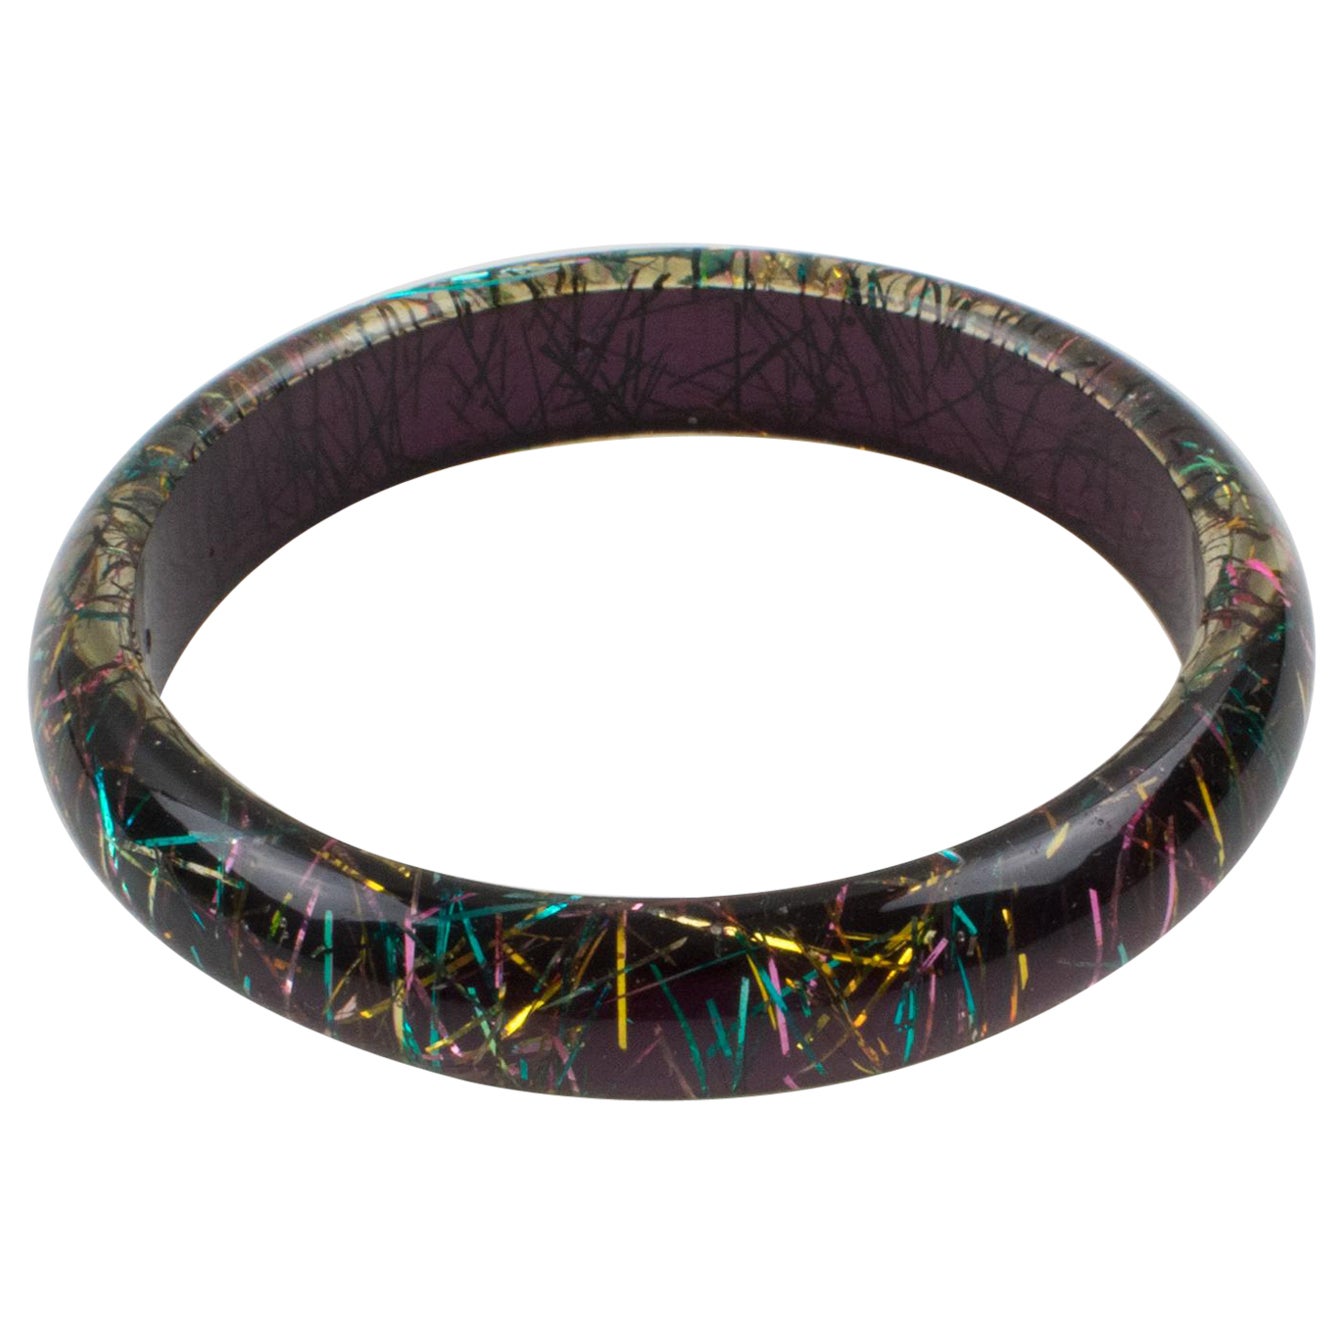 This lovely Lucite bracelet bangle has a domed shape and is comprised of clear Lucite, which is injected with metallic thread inclusions in multicolor tones with a deep purple background. The metallic threads sparkle like those of Christmas tinsels.